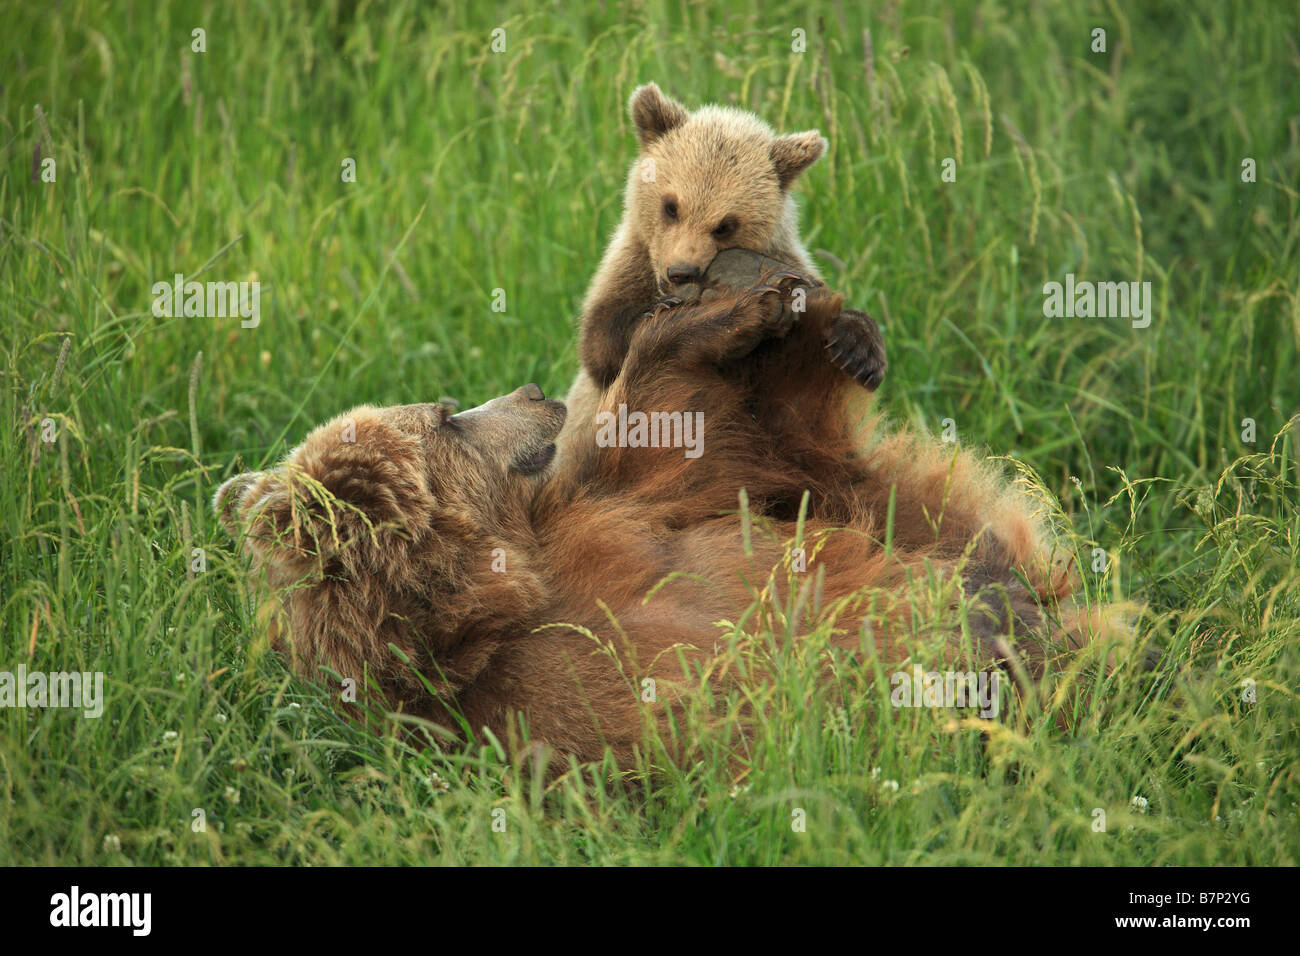 European Bear (Ursus arctos). Mother lying in grass while playing with cub Stock Photo